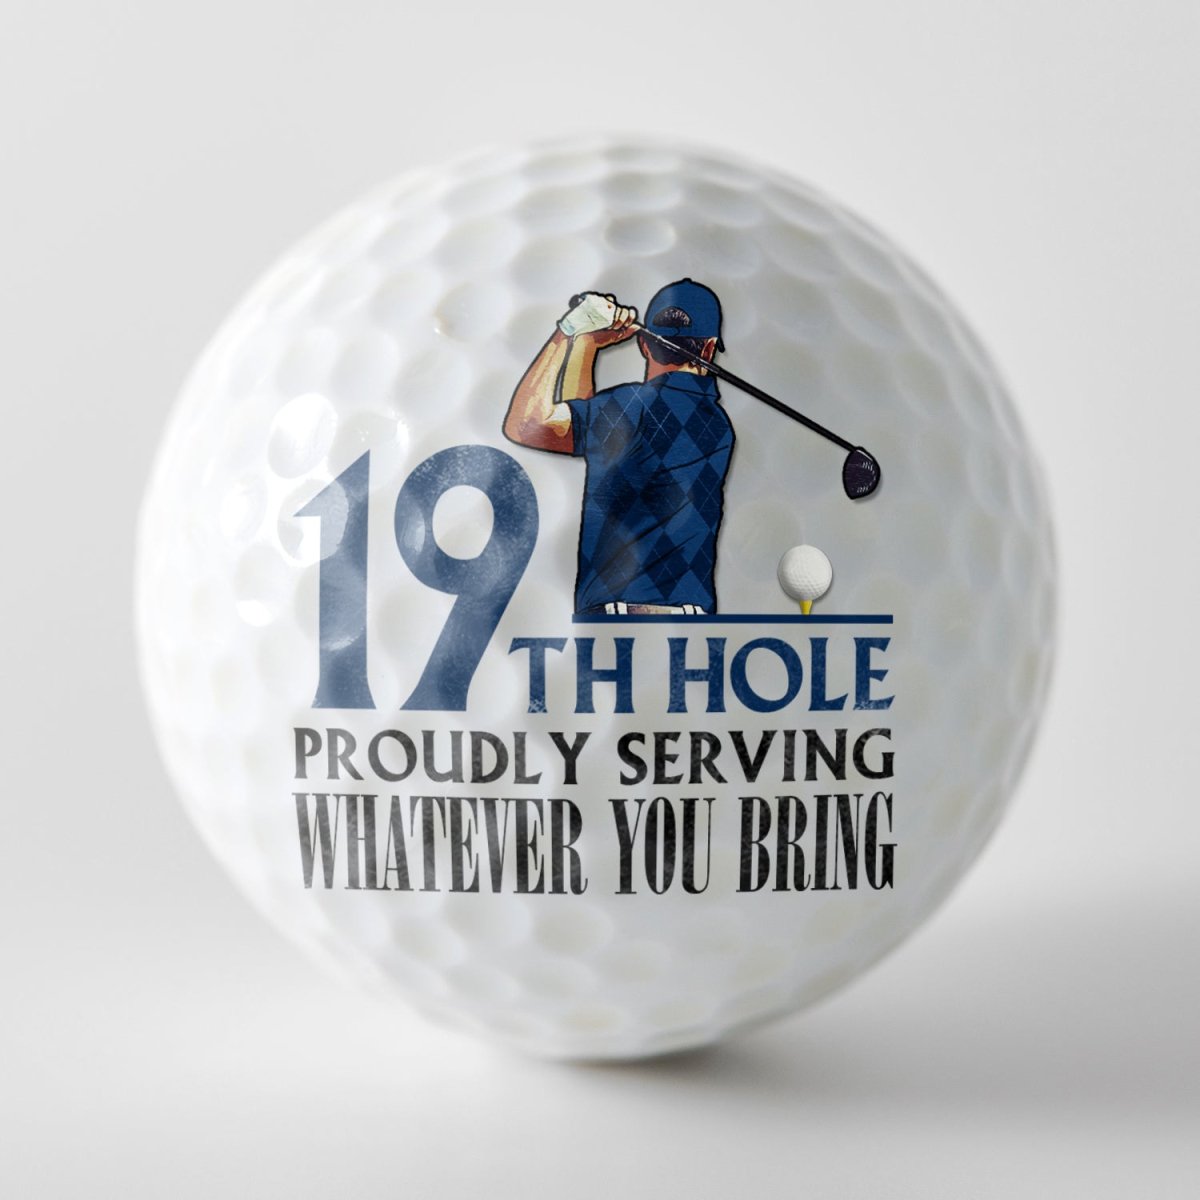 Golf Lovers - Hole Golf Club Proudly Serving - Personalized Golf Ball - The Next Custom Gift